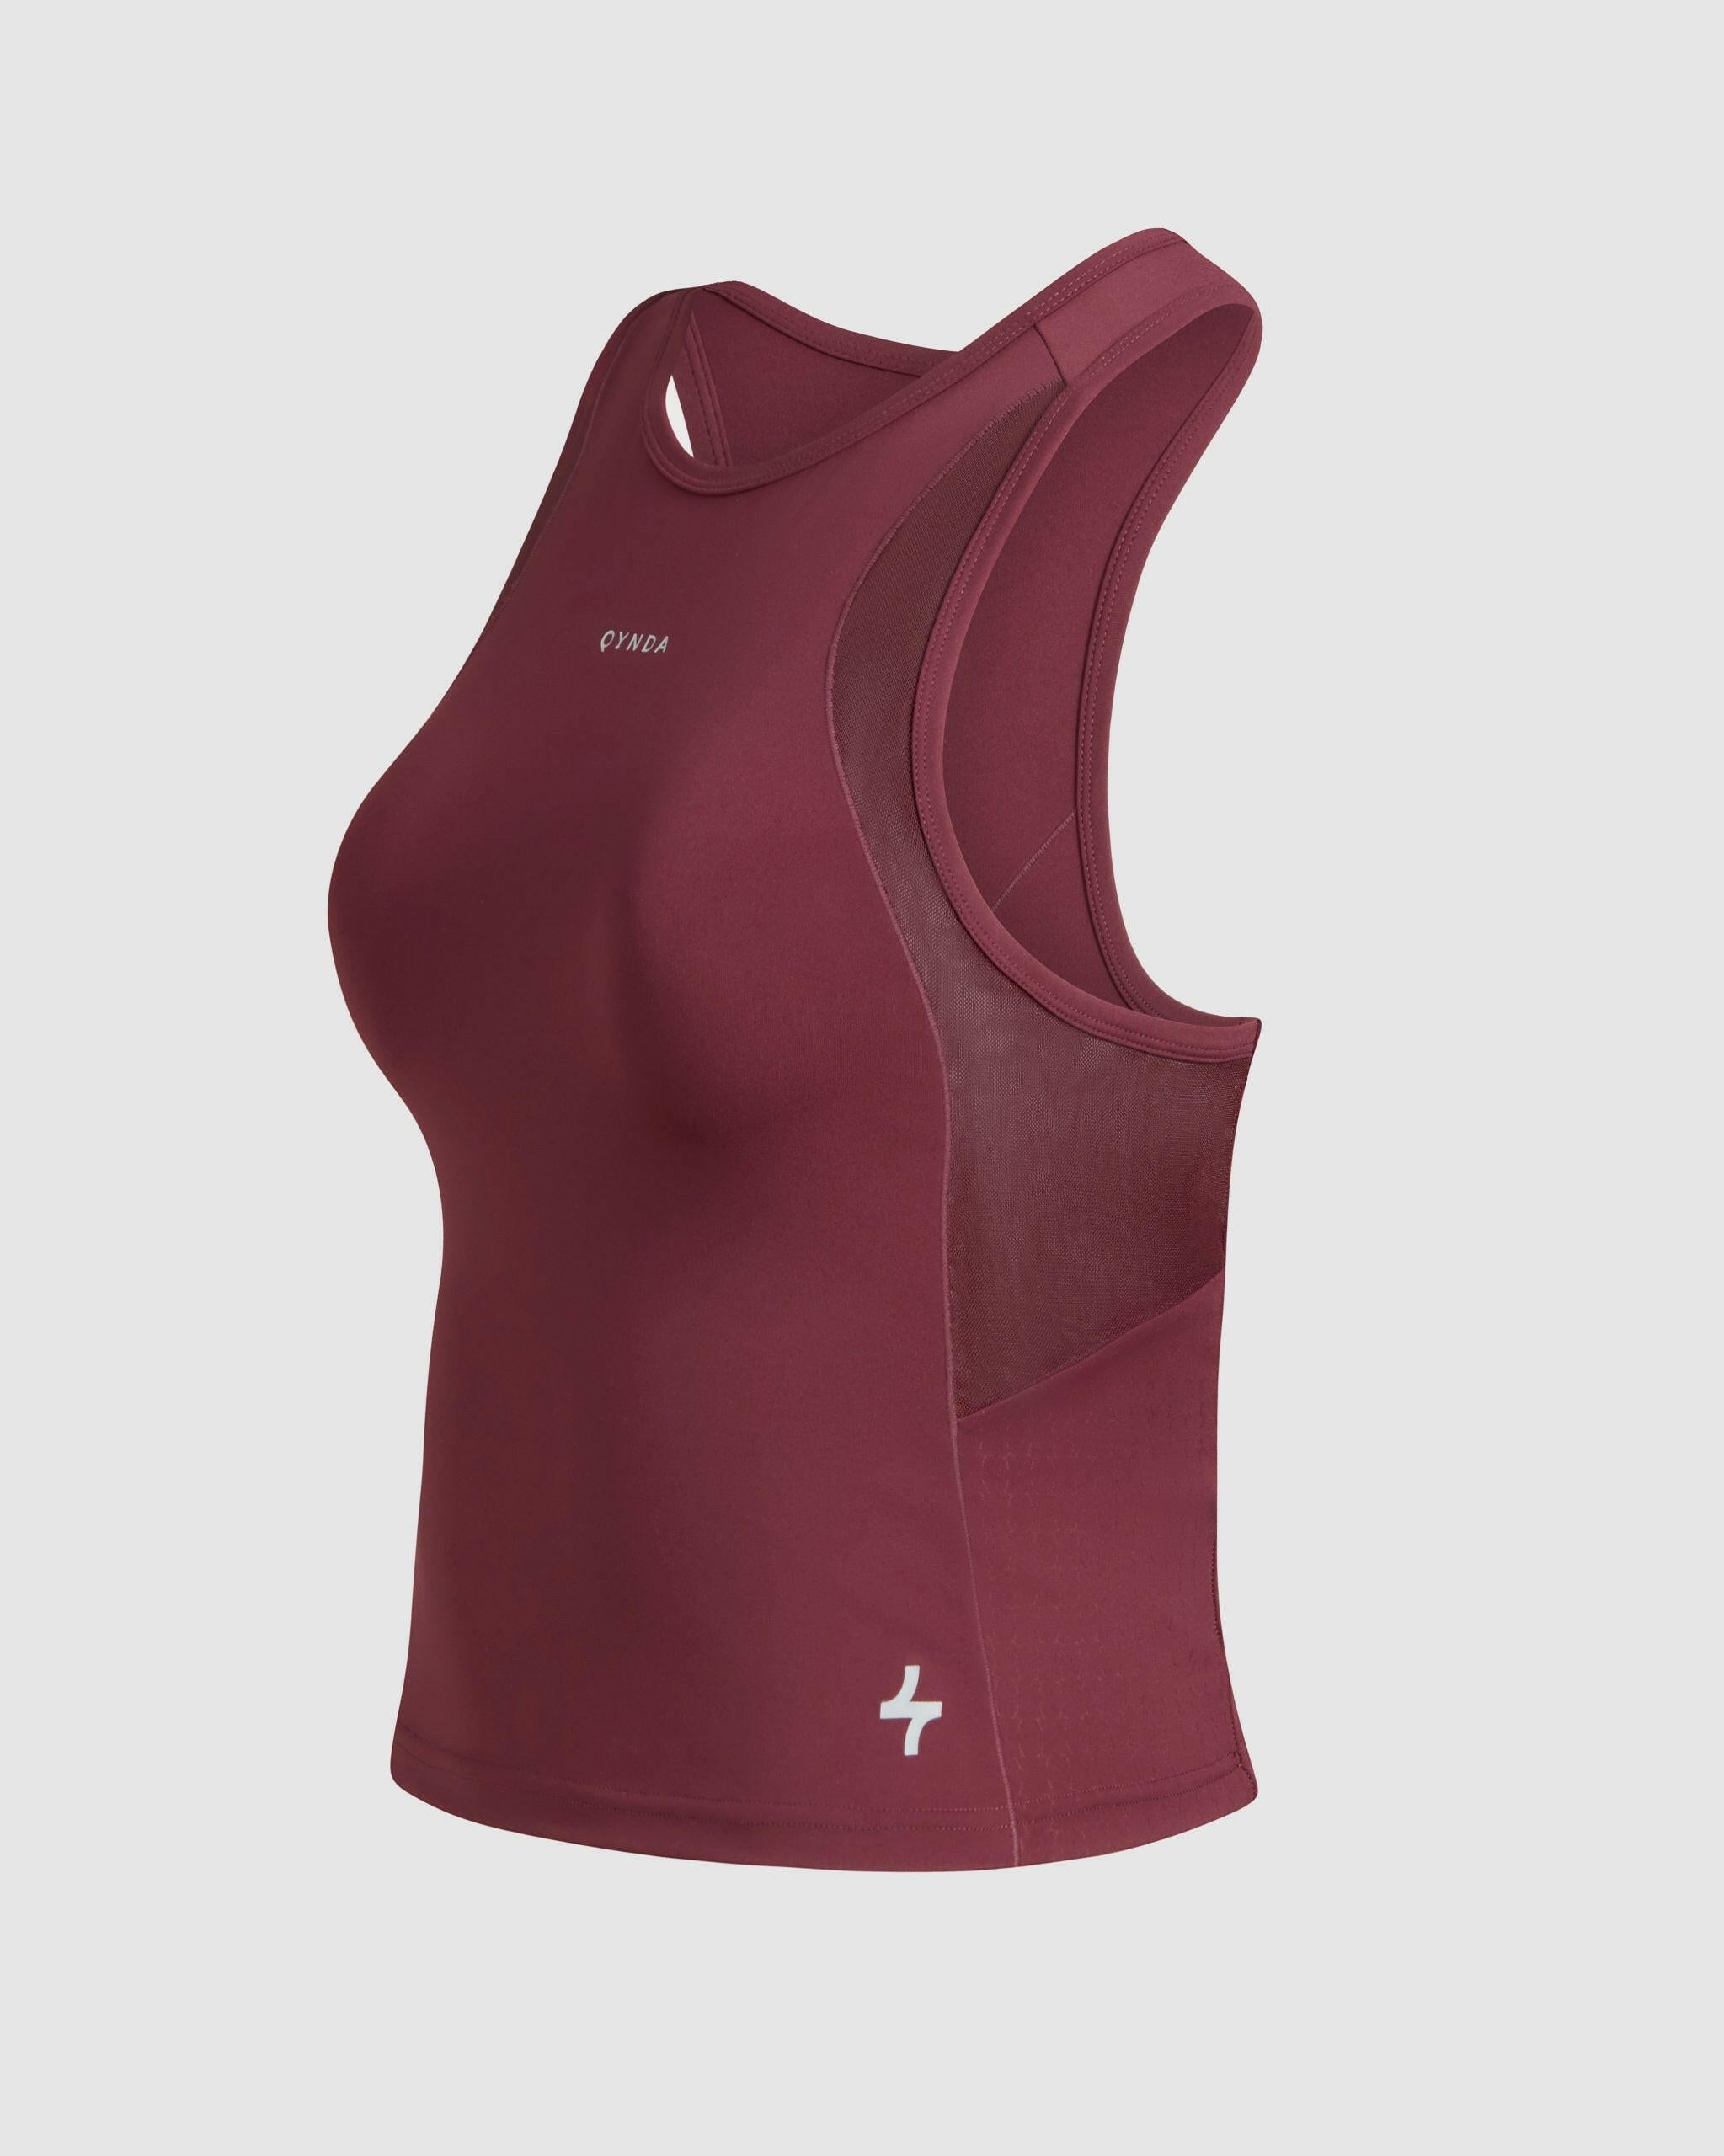 Side view of Maroon colored BADA TANK TOP with qynda logo, high neckline and mesh back and sides isolated on a white background.